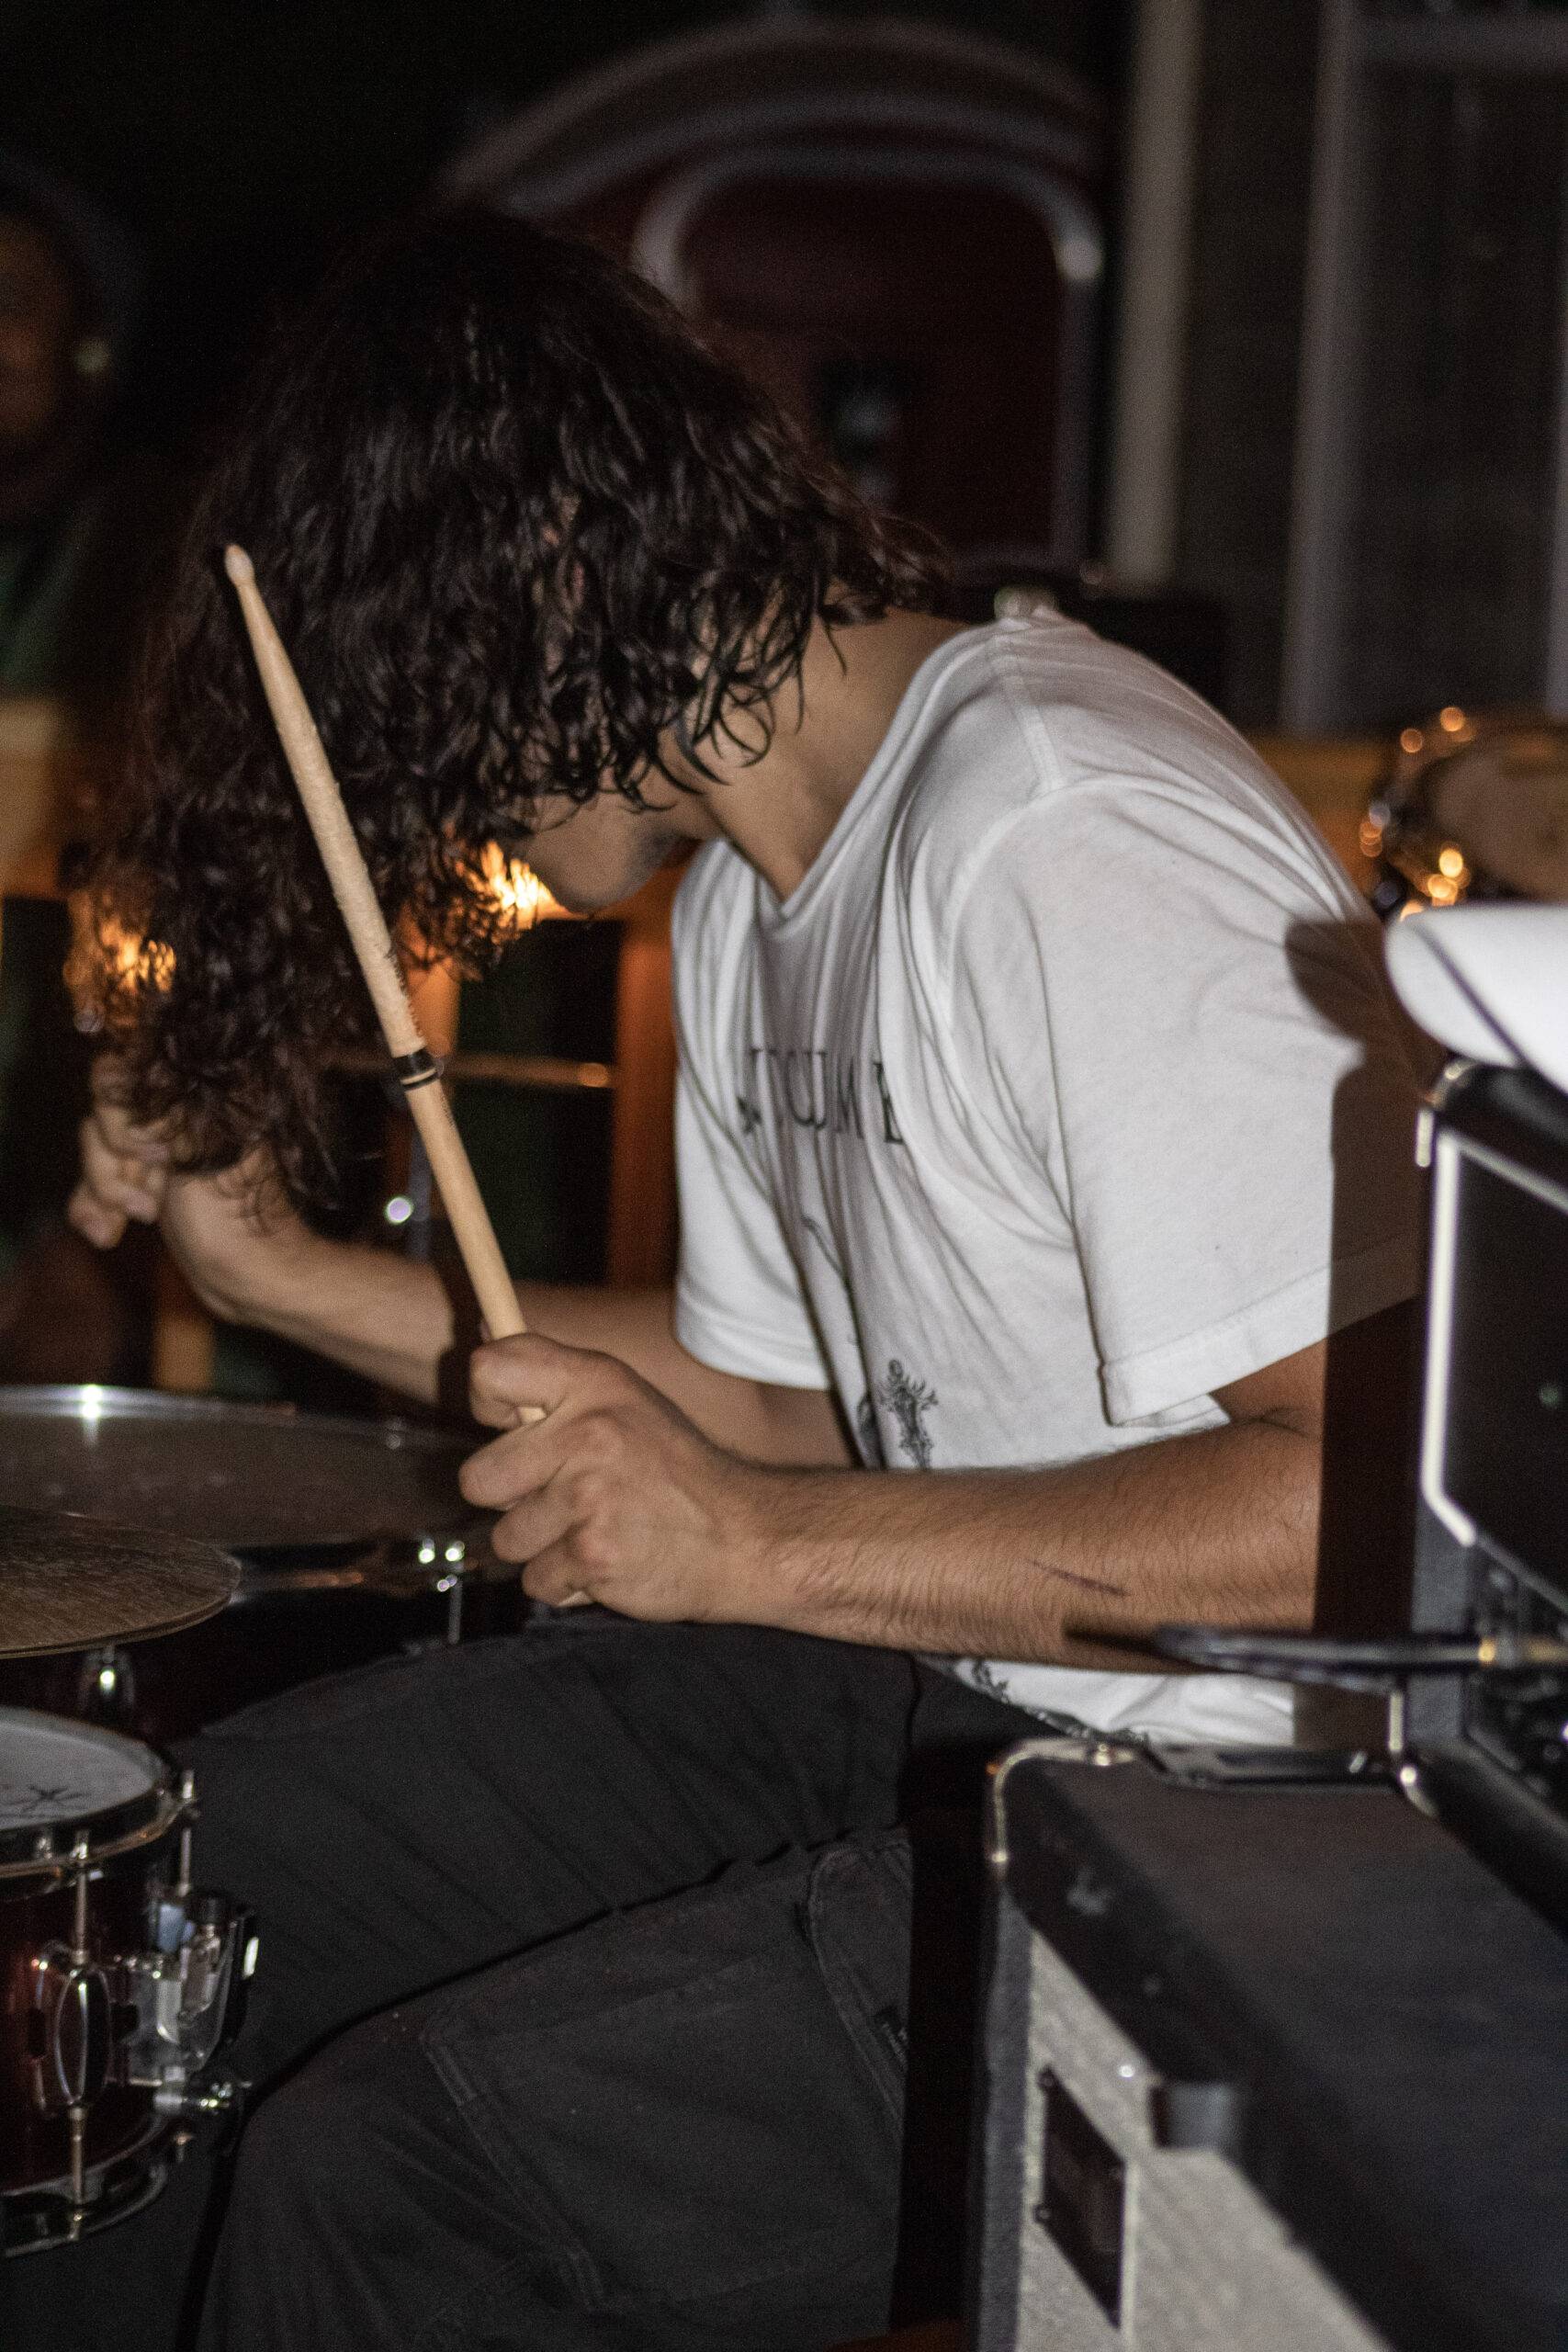 A long-haired drummer works his way through a beat while performing.